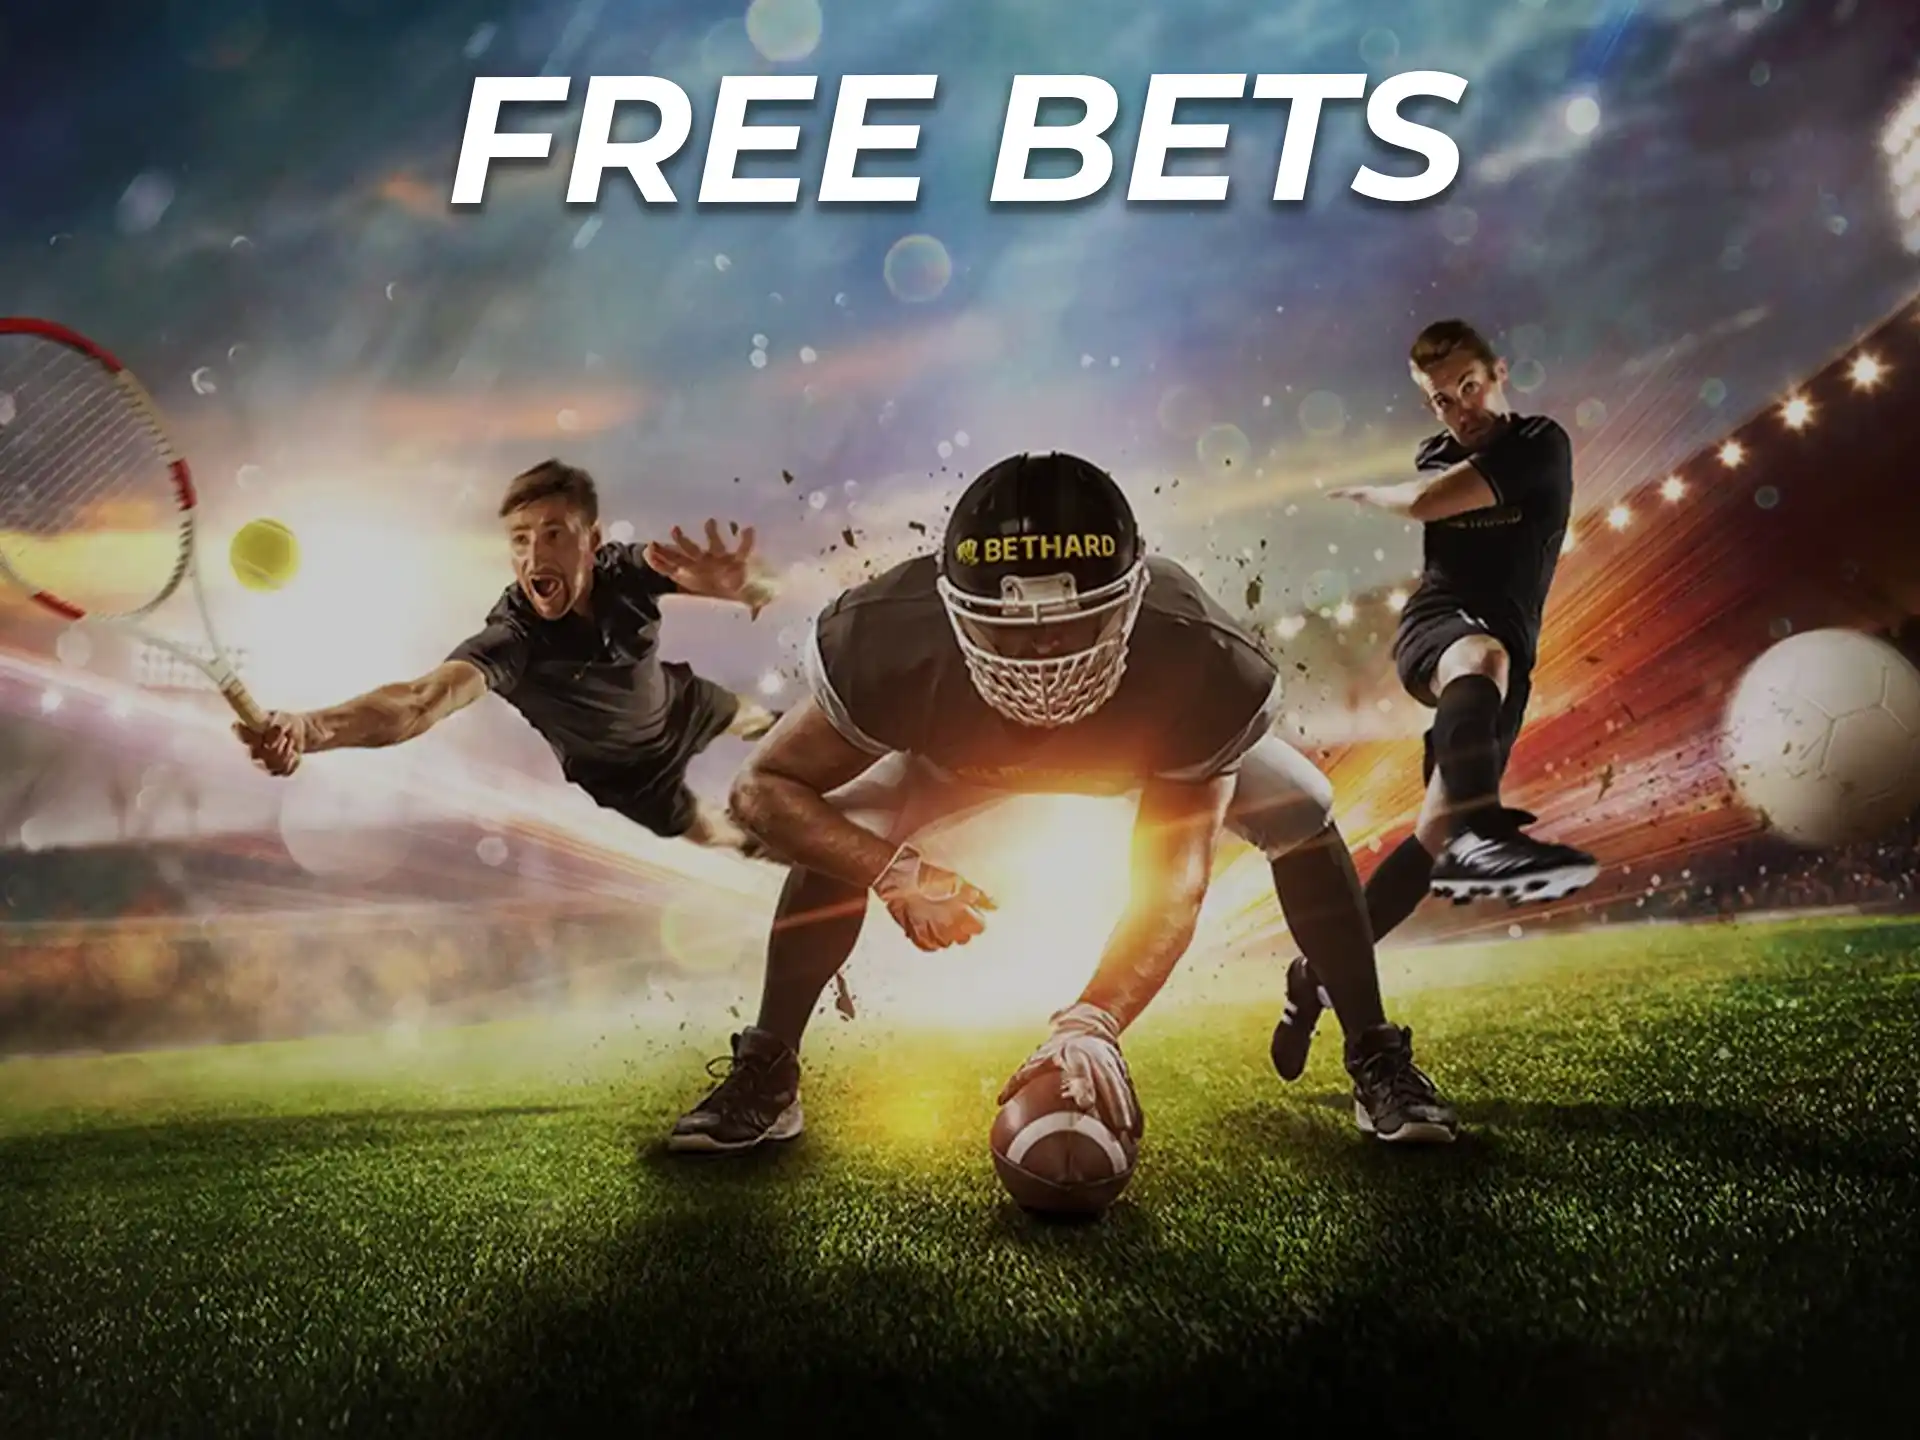 Players can get Free Bets and not lose their money.